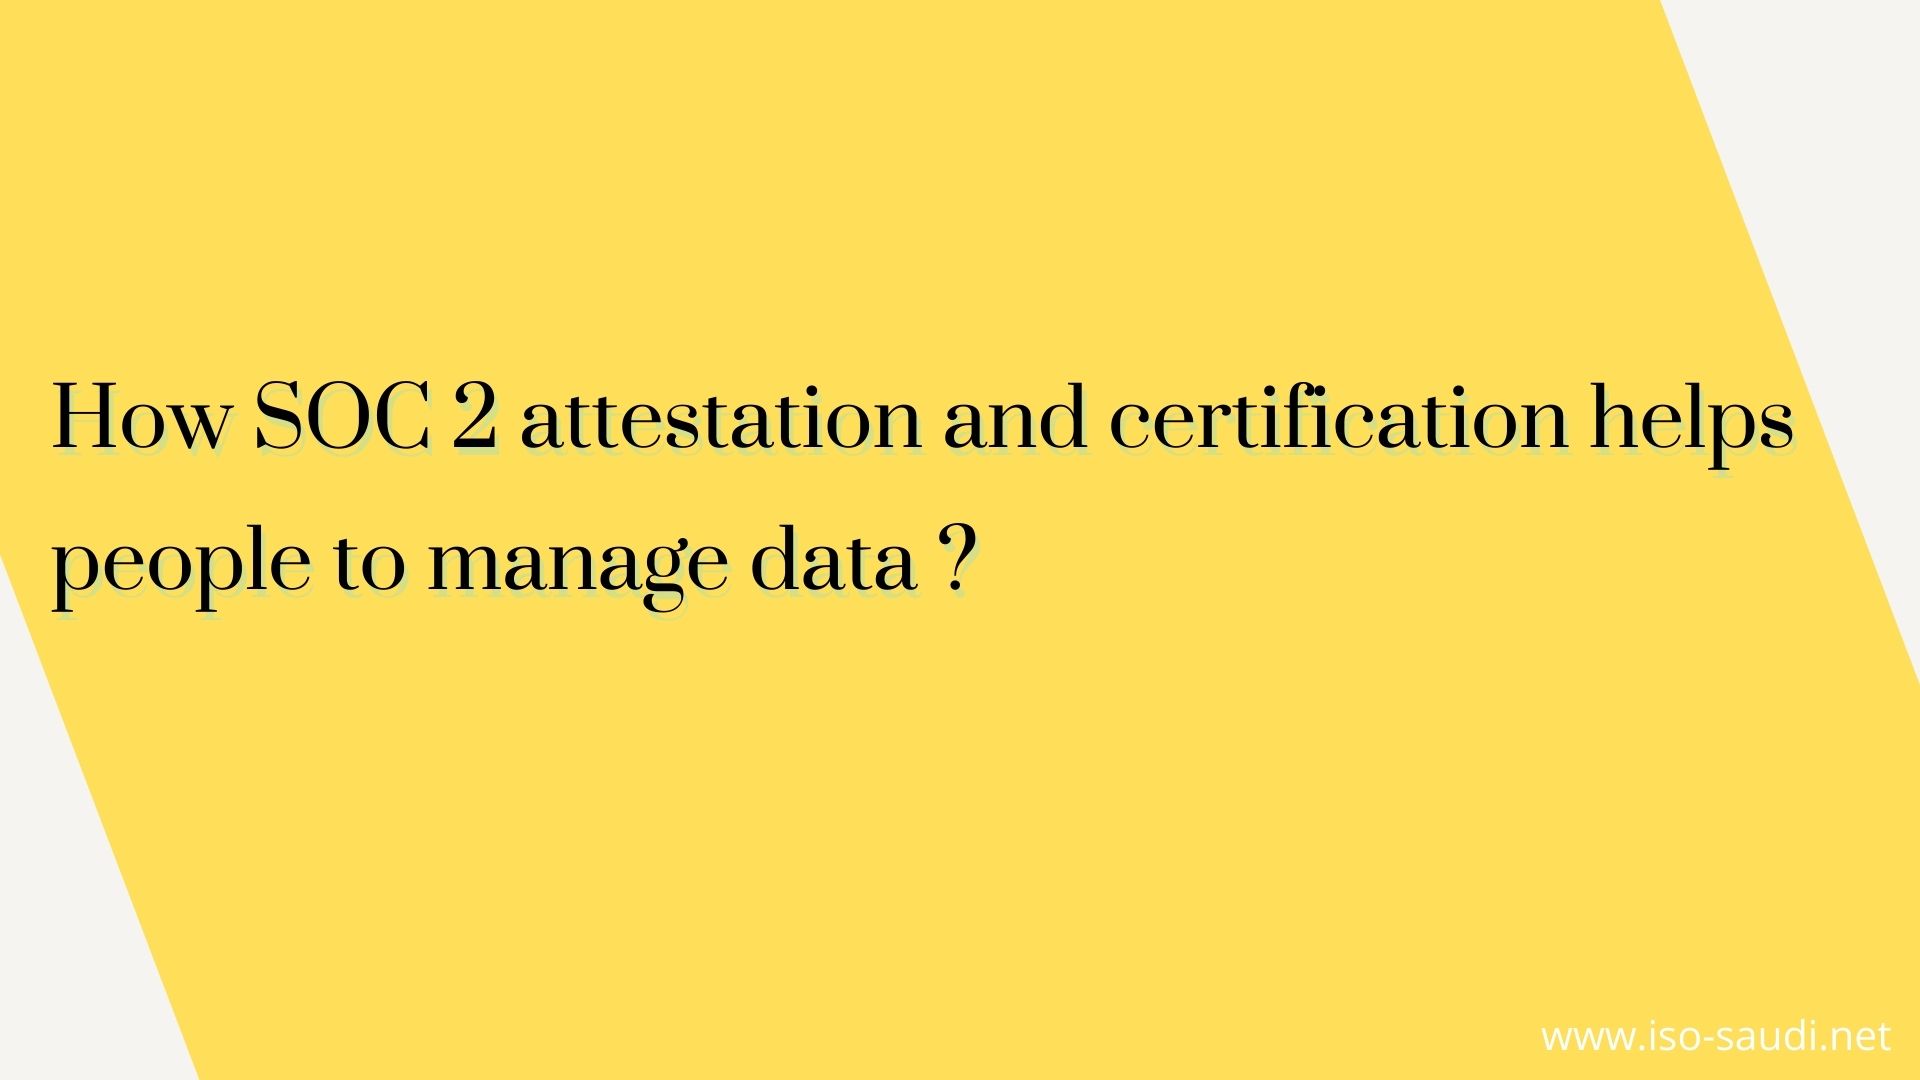 How SOC 2 attestation and certification helps people to manage data